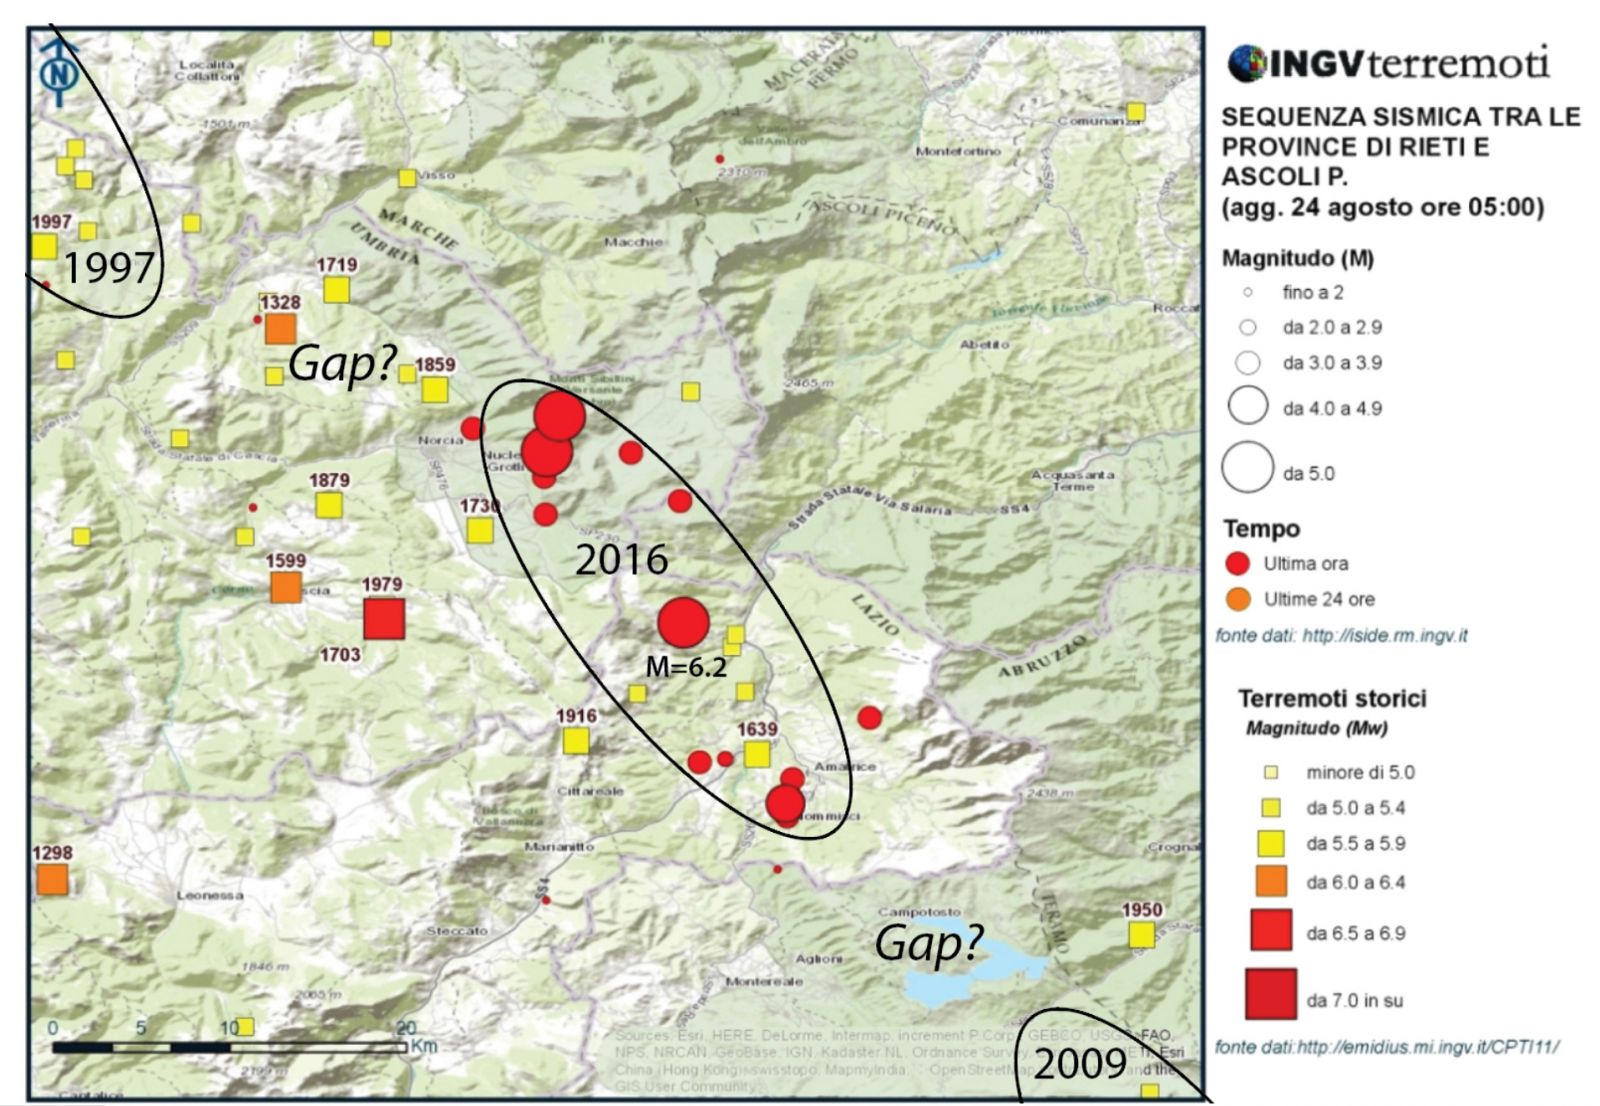 2016 earthquake location compared to 1997 and 2009 earthquakes. Image credit: Temblor.net/INGV